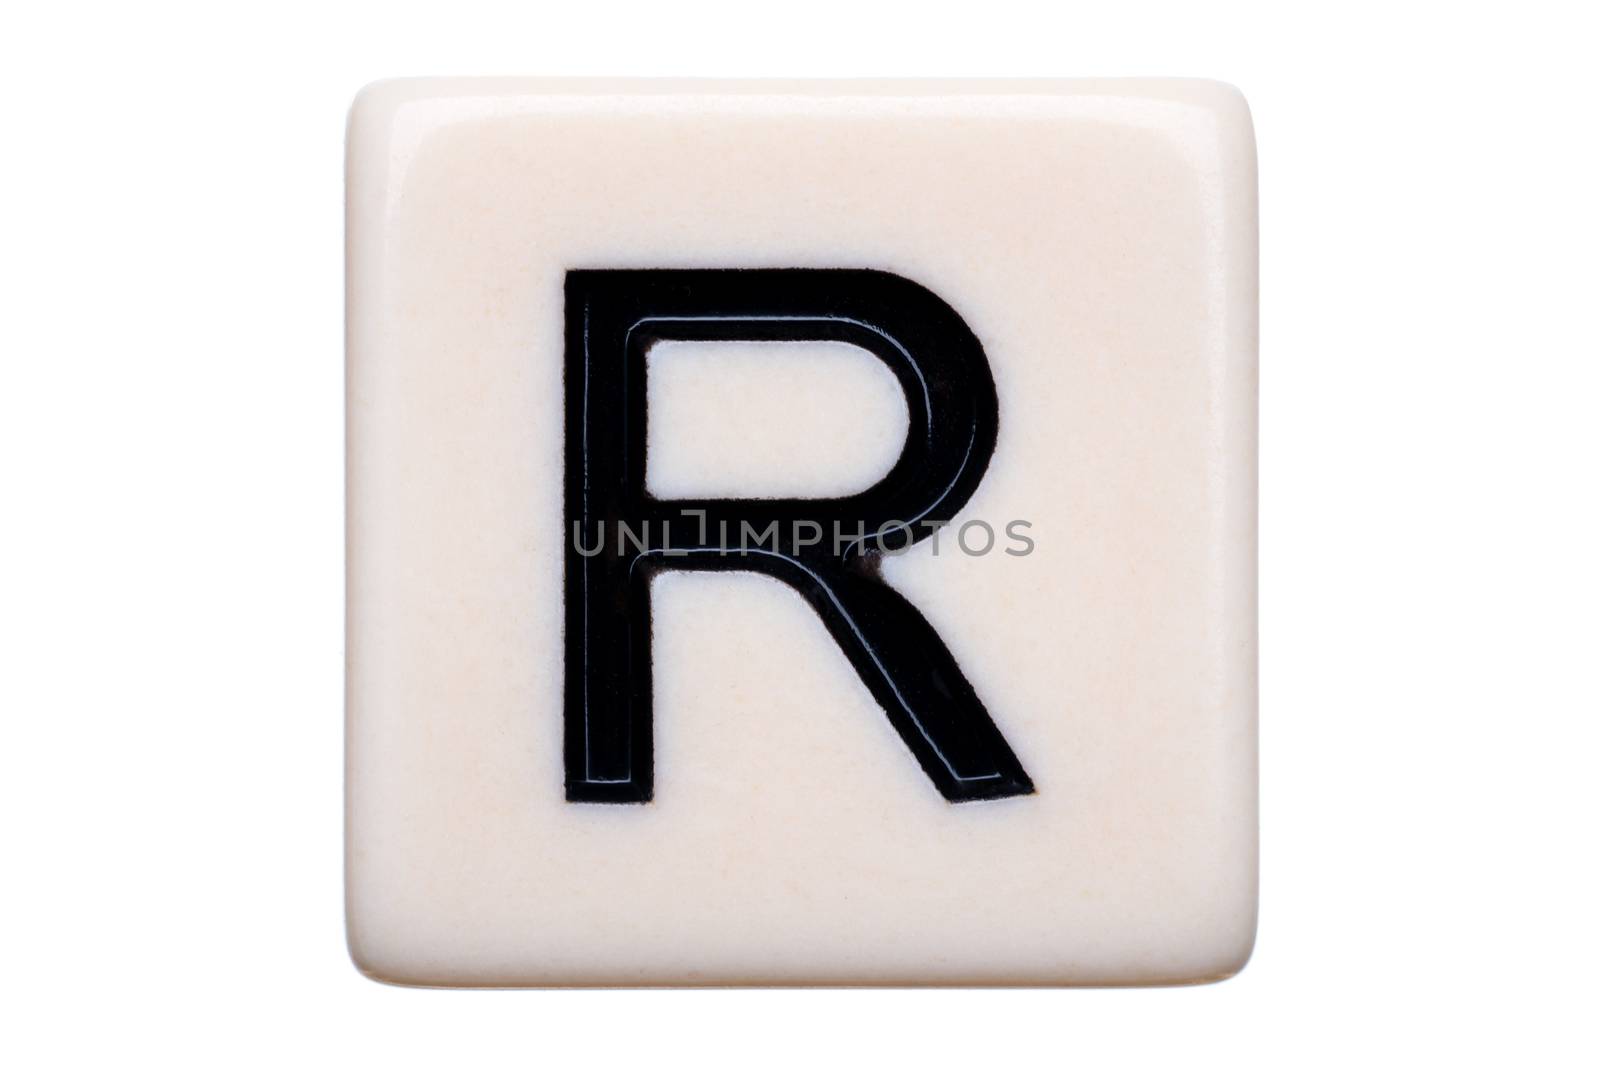 A macro shot of a game tile with the letter R on it on a white background.